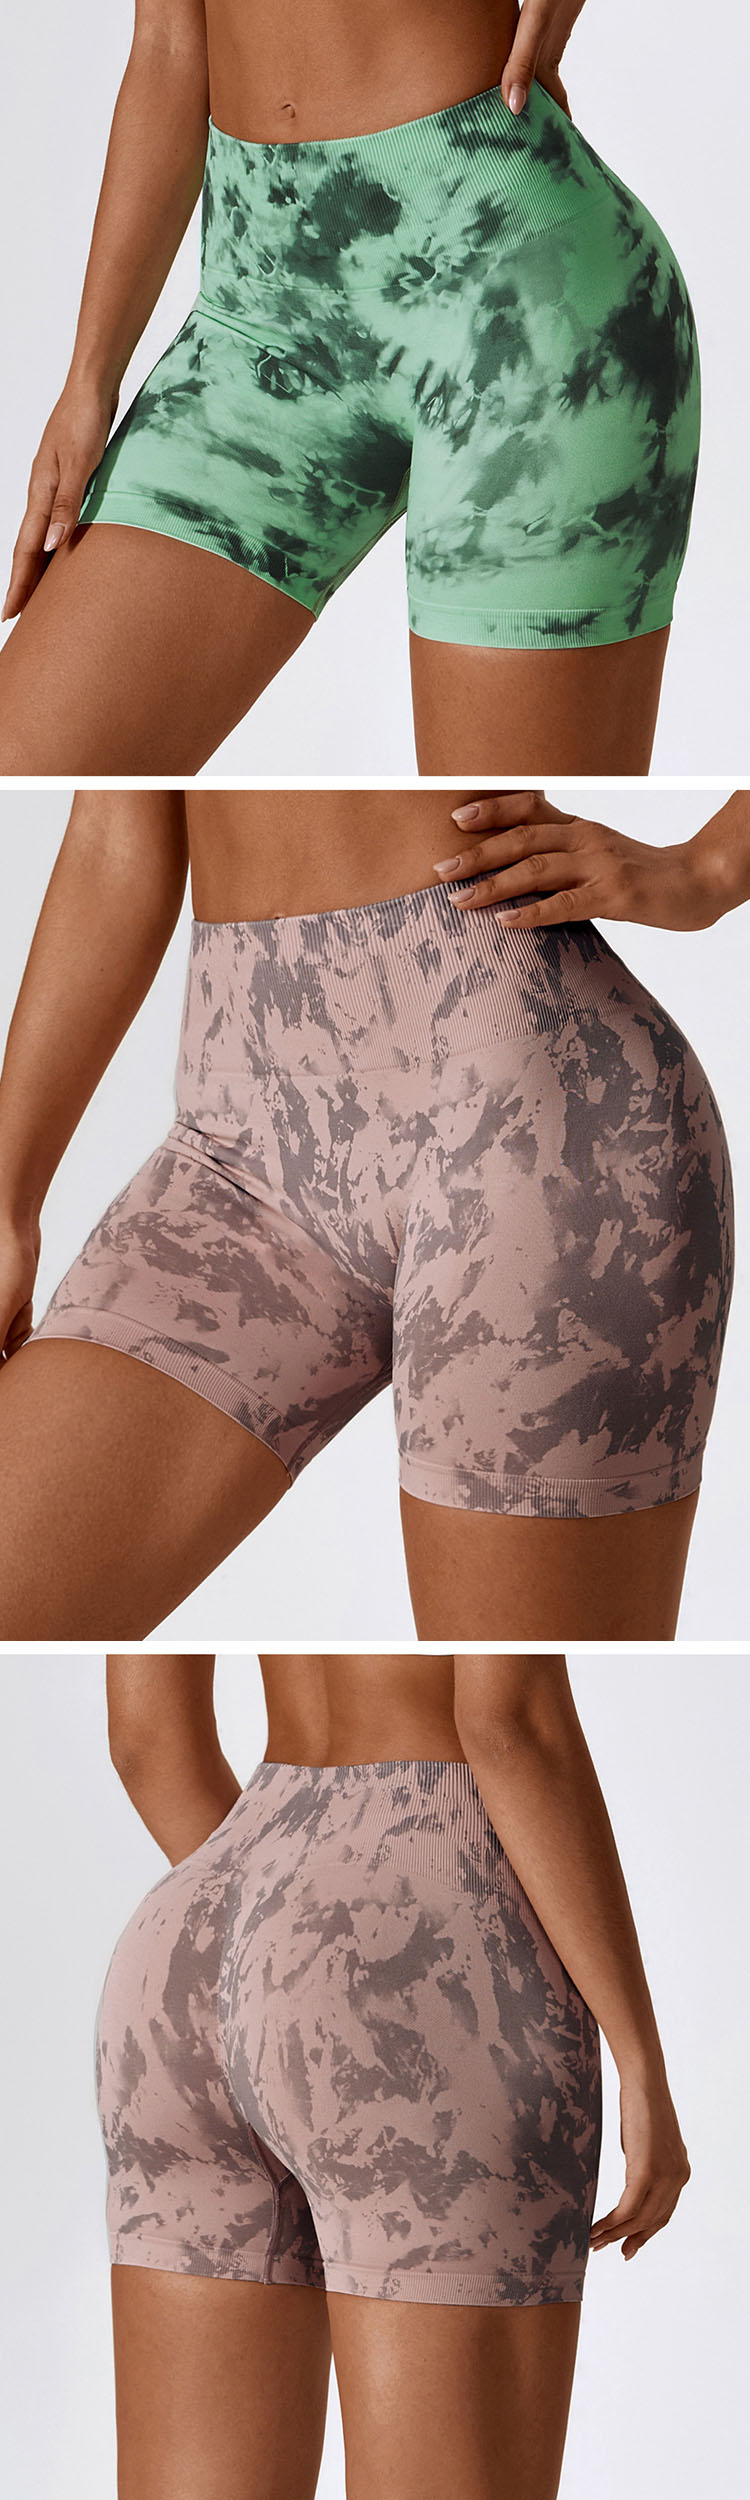 floral gym leggings are designed with elements of the same color contrast